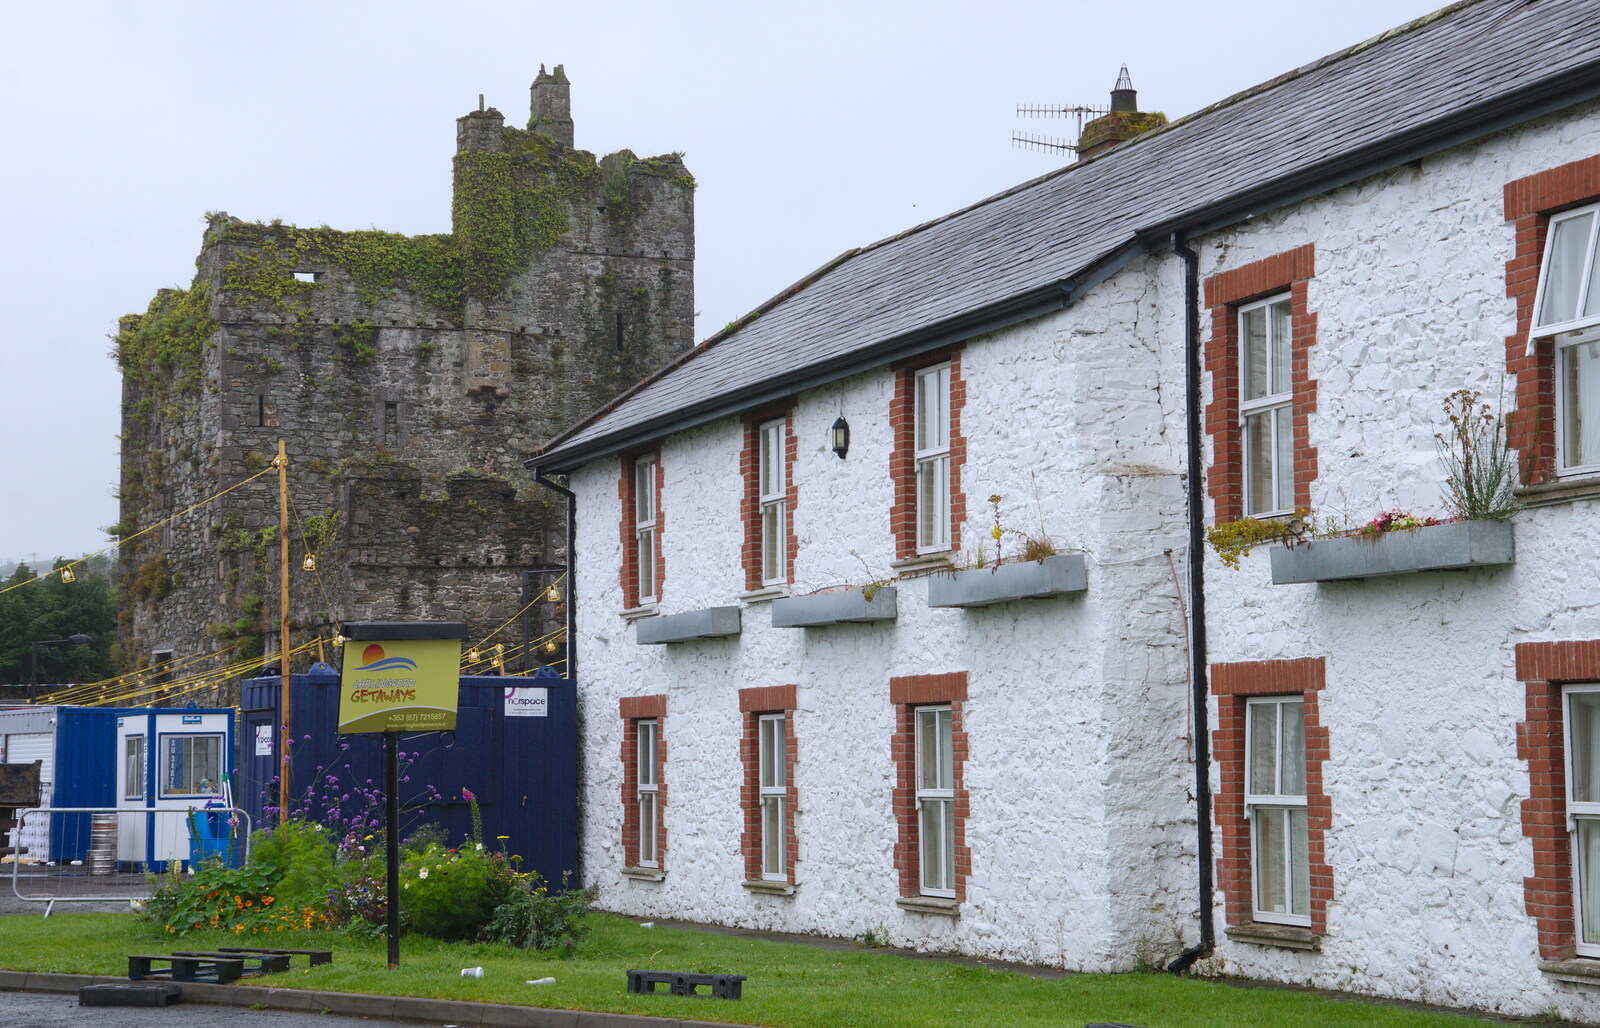 Carlingford houses from The Giant's Causeway, Bushmills, County Antrim, Northern Ireland - 14th August 2019